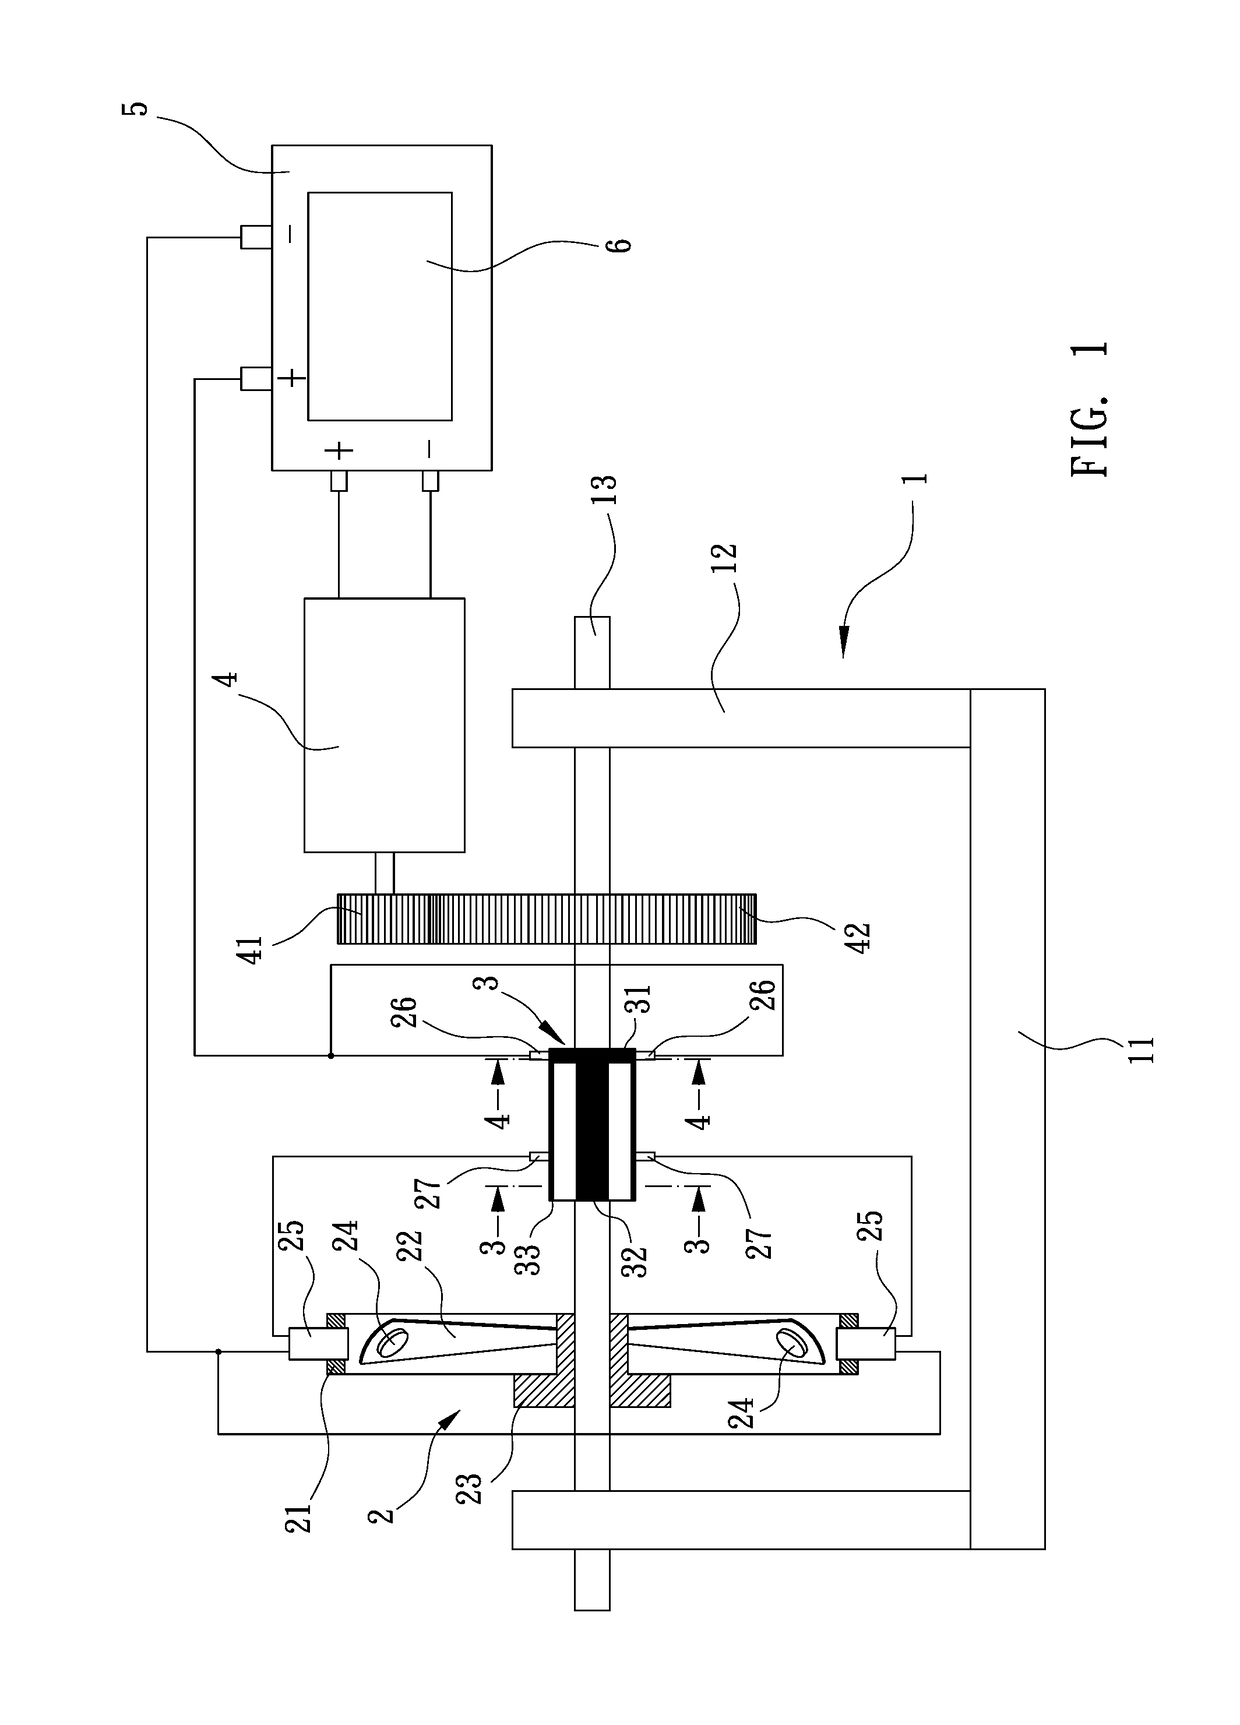 Low-energy-consumption and high-efficiency circulating electric motor